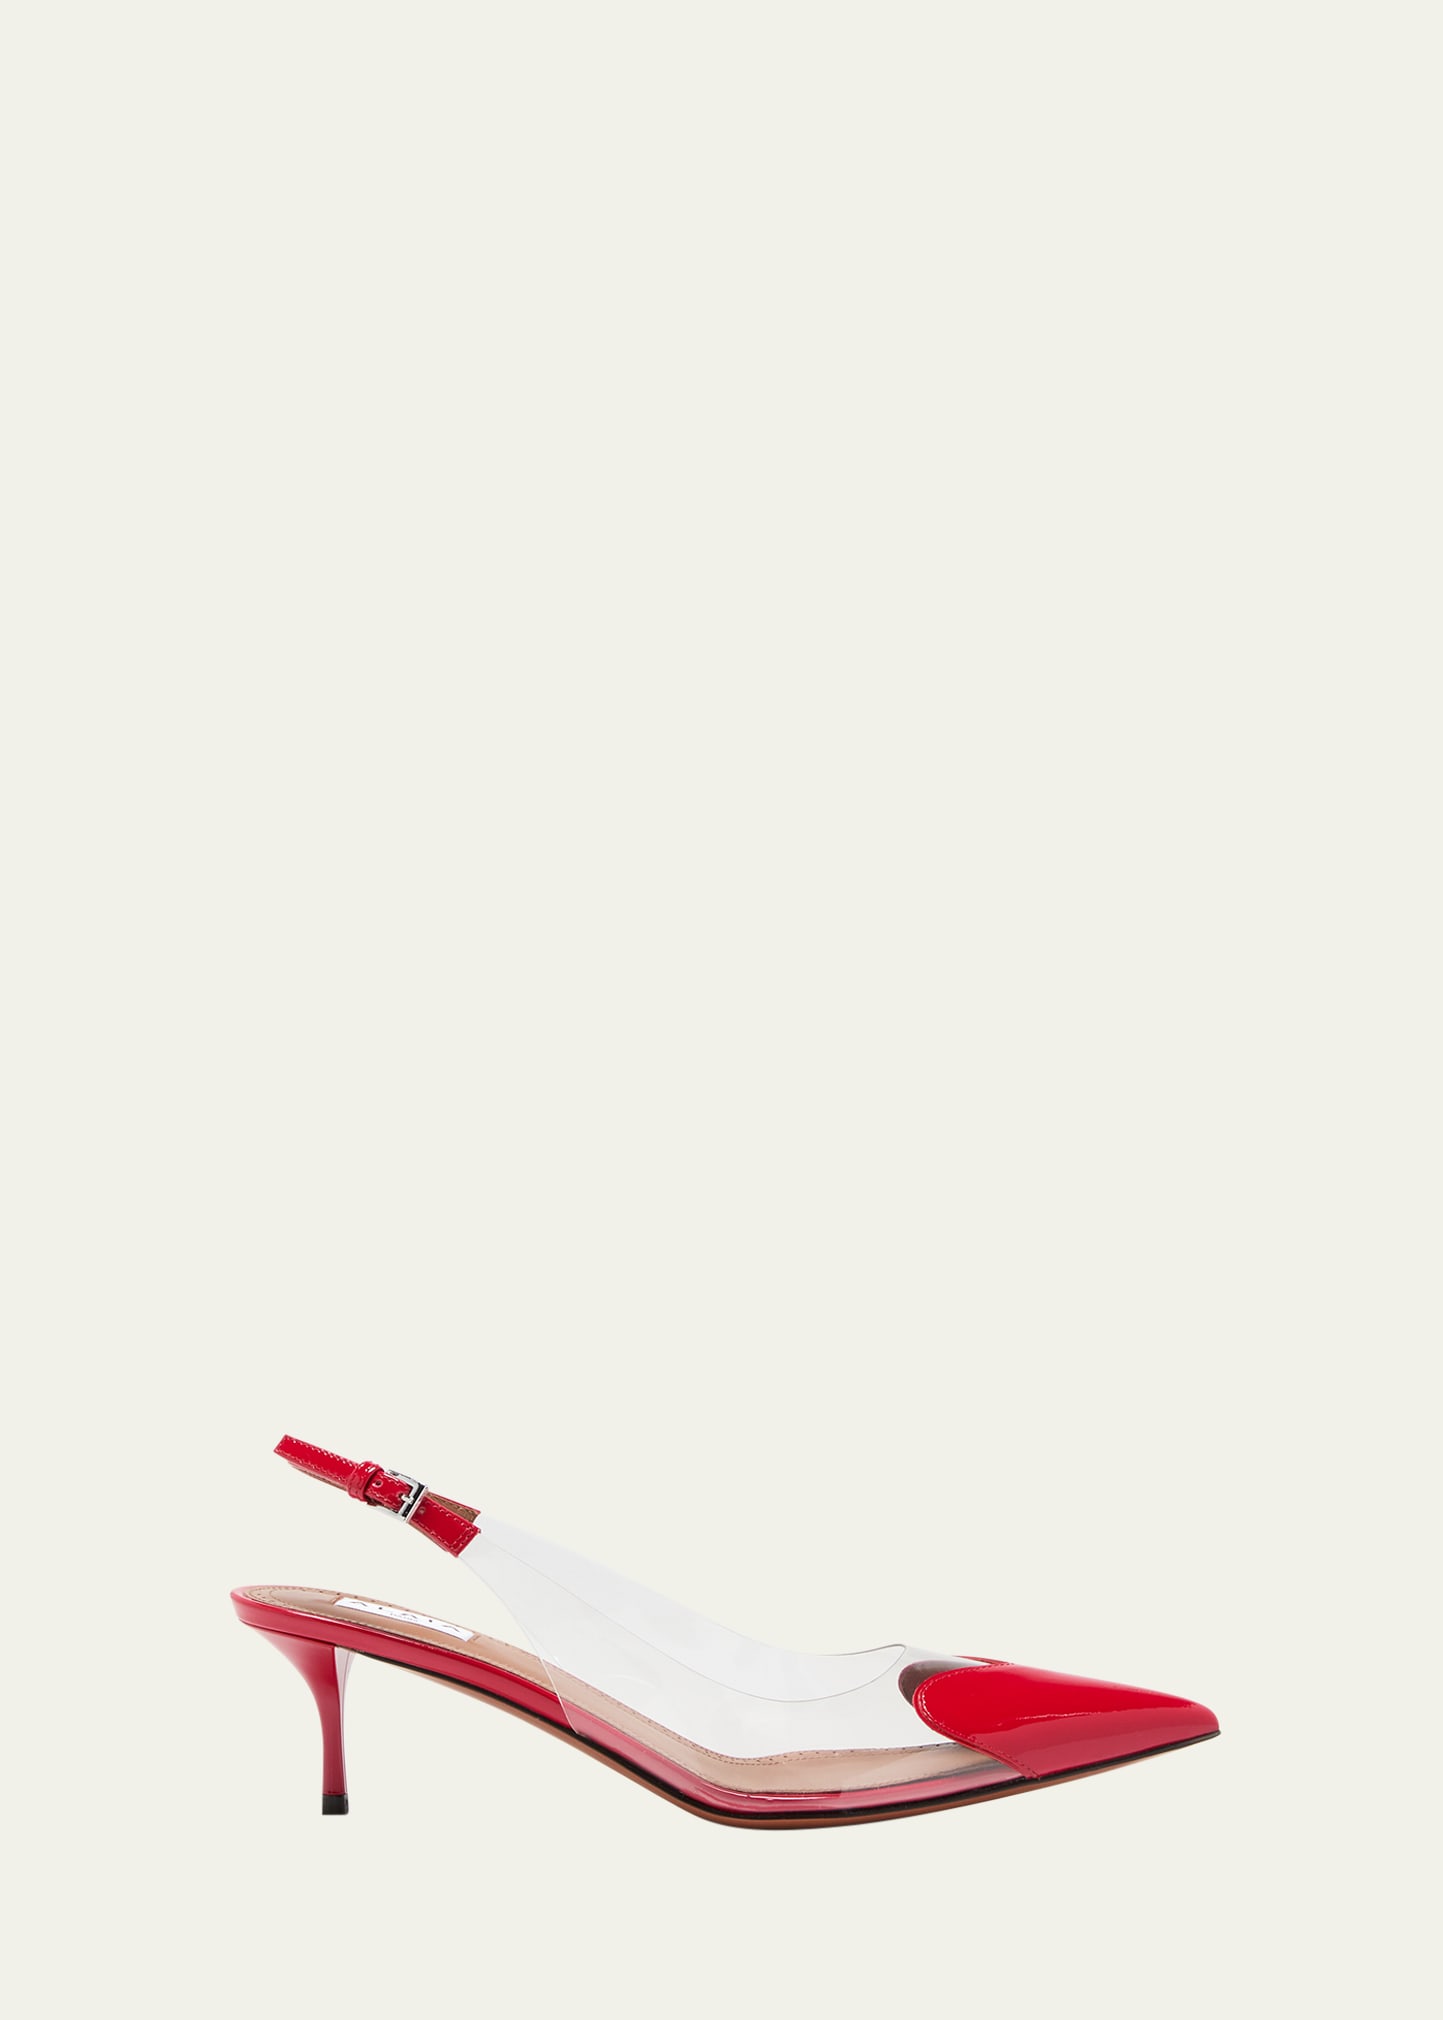 Alaïa Le Caur Leather And Pvc Slingback Pumps In Red